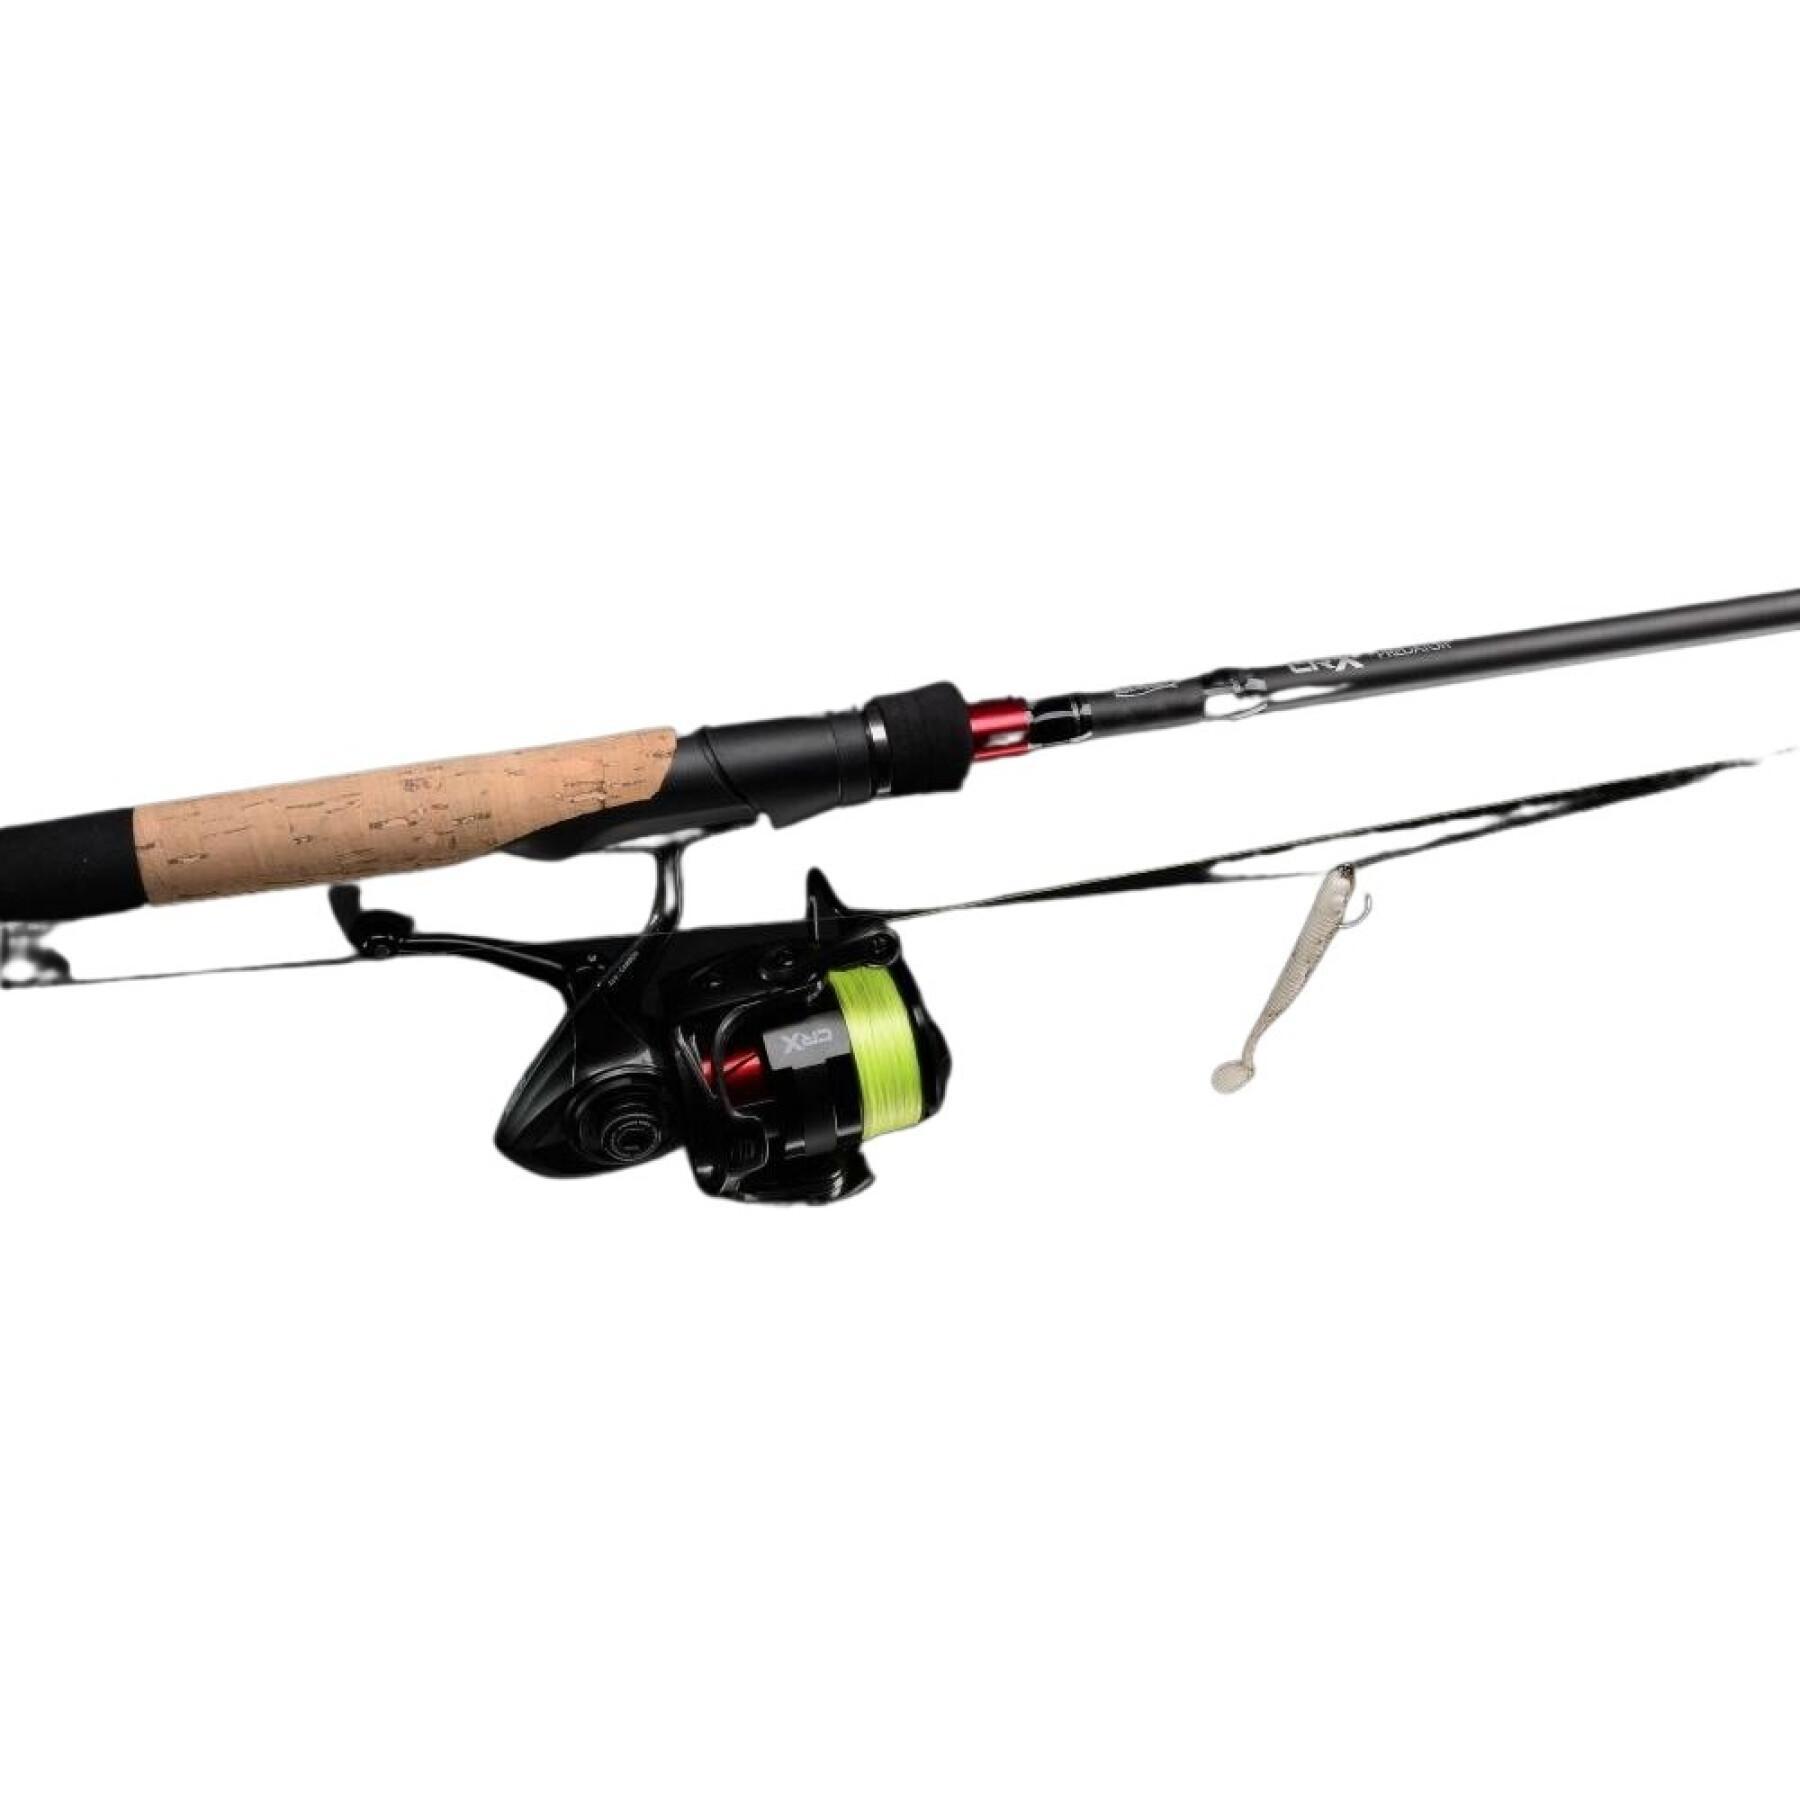 Canne spinning Spro Crx Dropshot & Finesse 4-21g